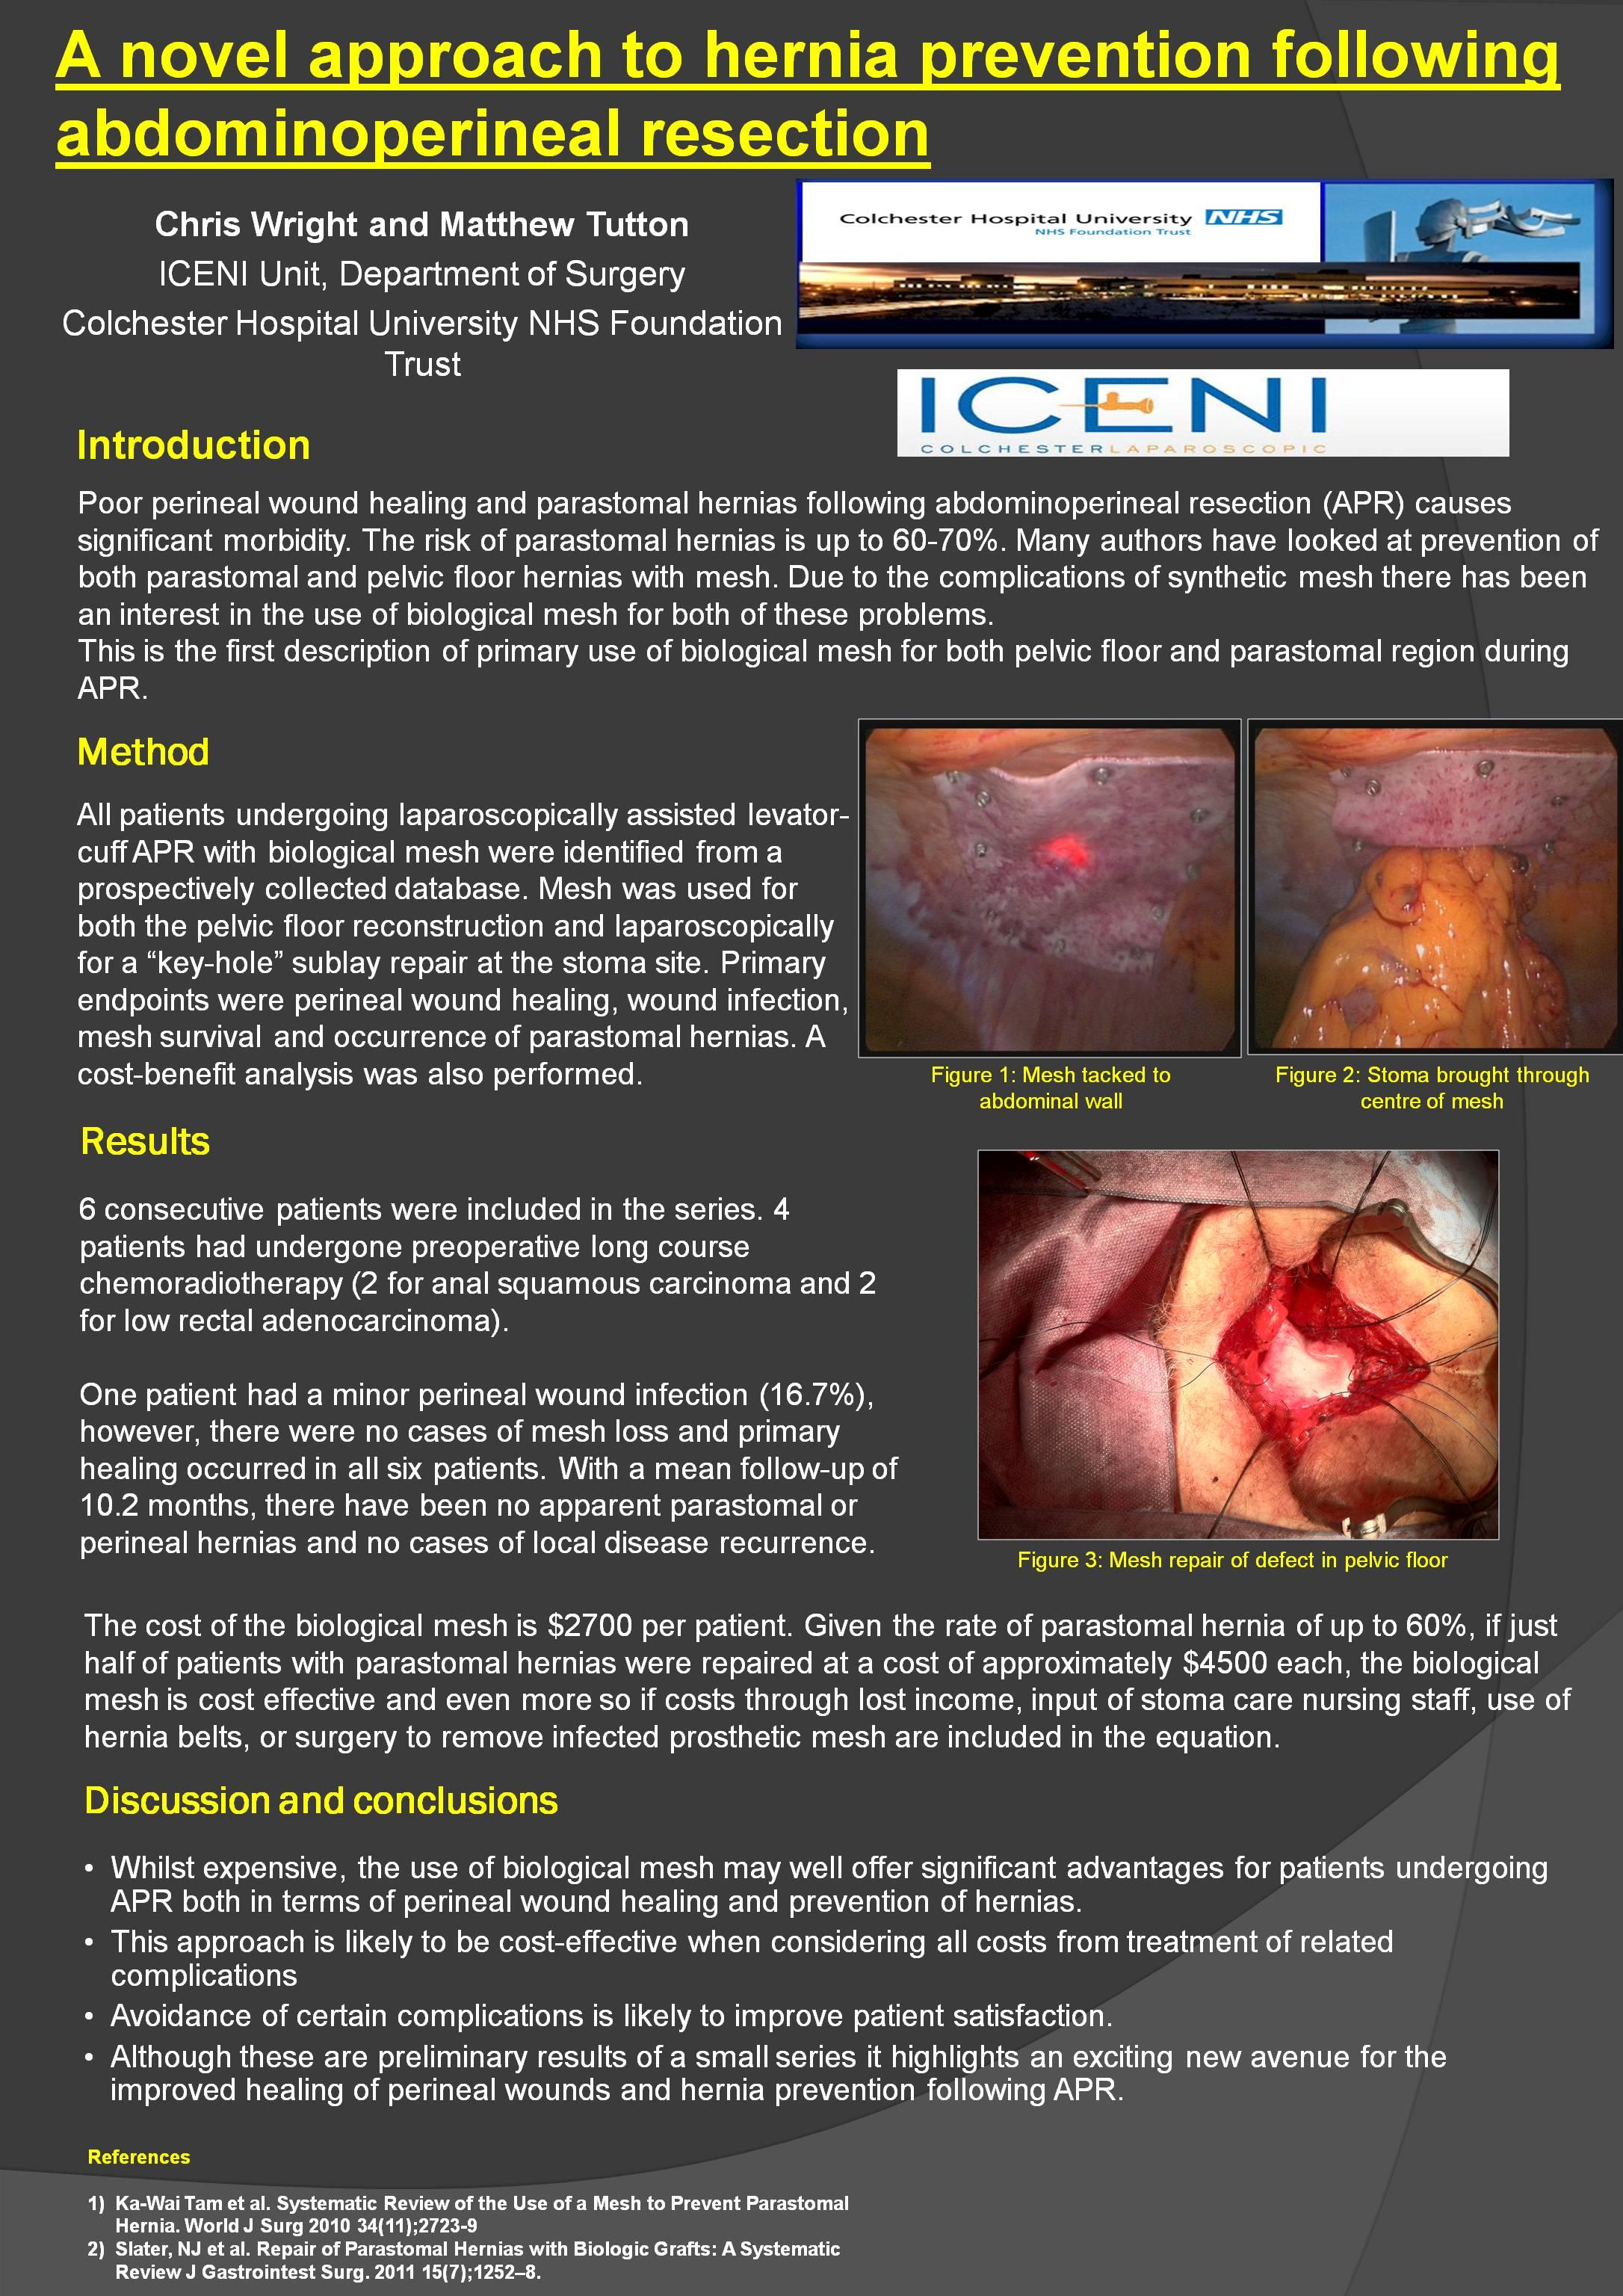 A Novel Approach To Wound Healing And Hernia Prevention Following